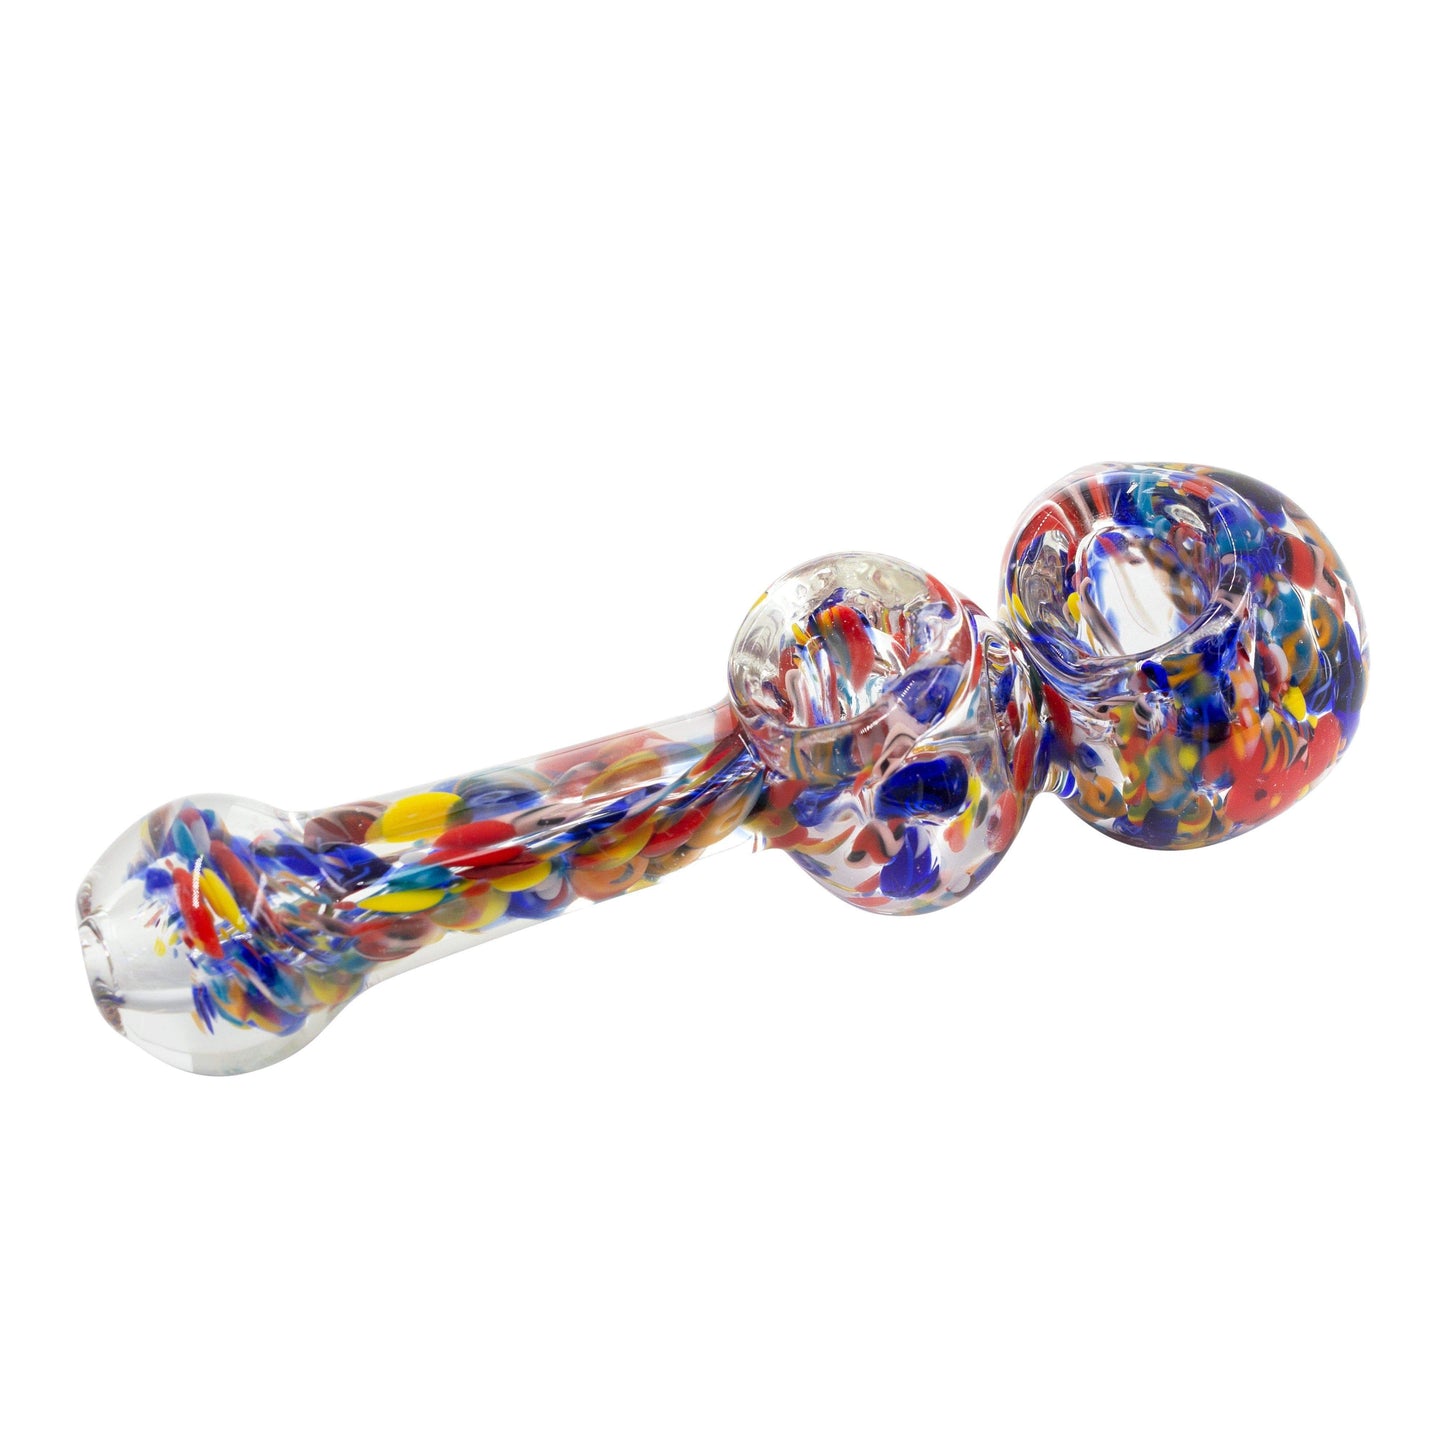 6-inch glass pipe smoking device double bowl aquarium-inspired look cute ocean colors